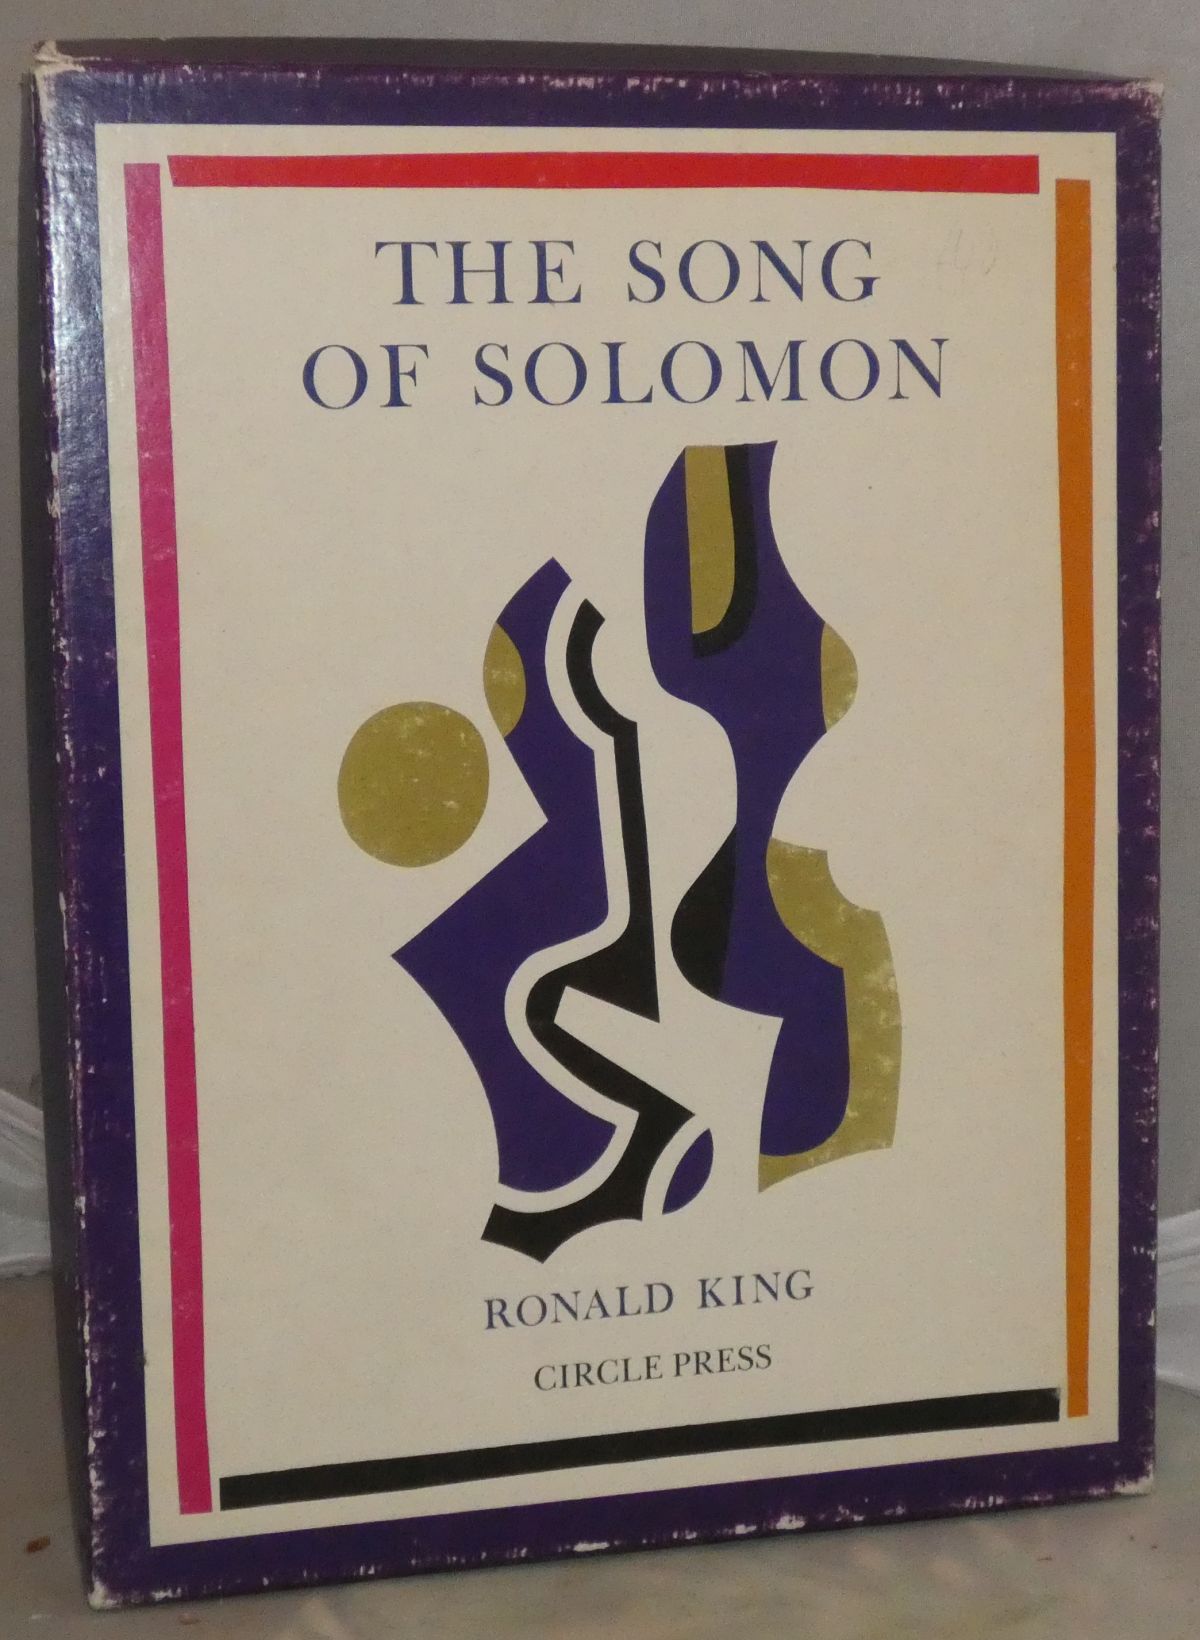 Image for The Song of Solomon from the Old Testament with Original Screen Images Designed and Printed By Ronald King